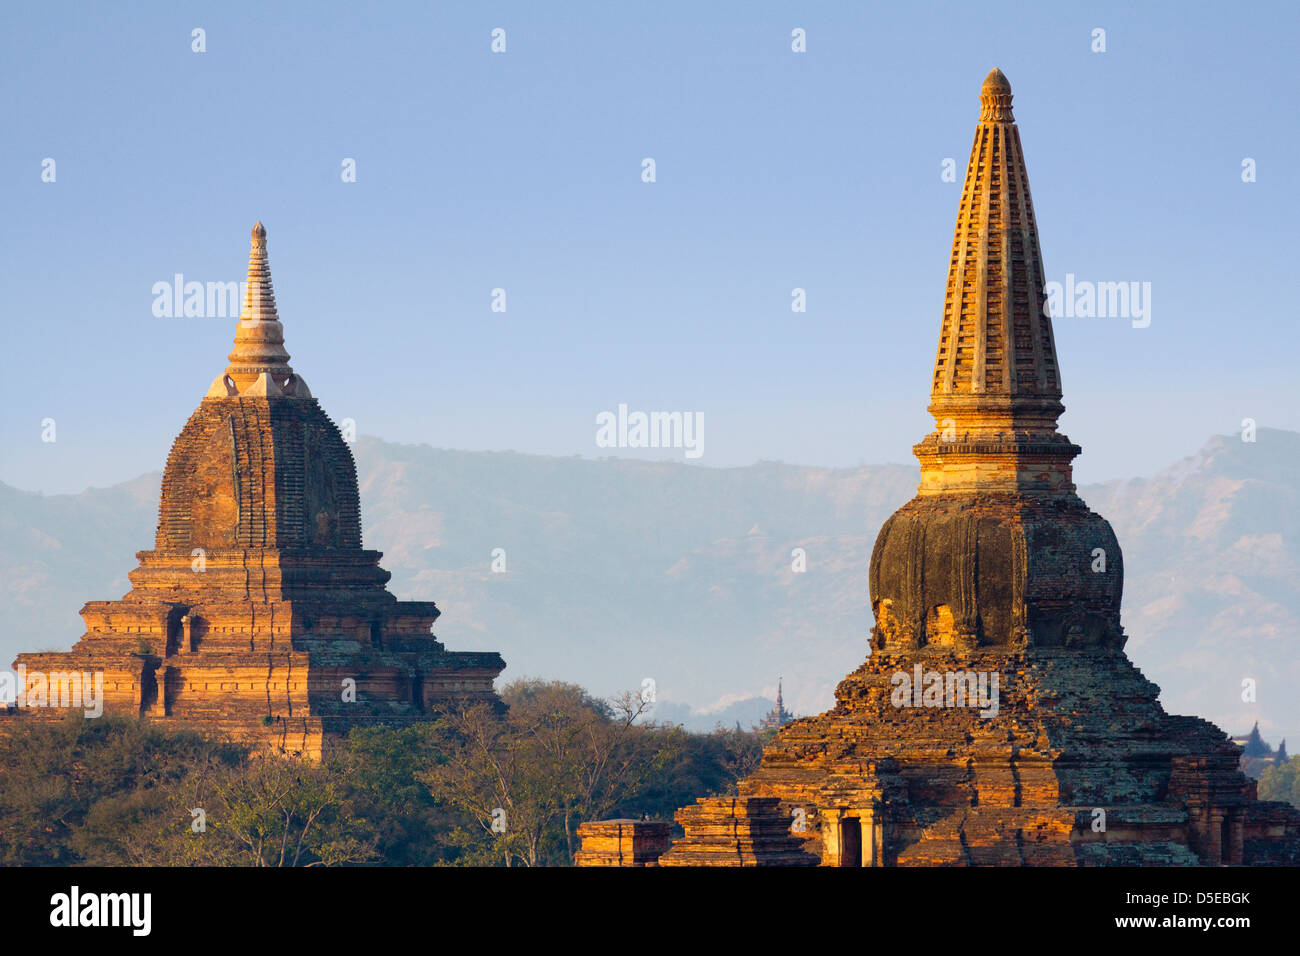 The Temples and Pagodas of Bagan, Myanmar - early morning 7 Stock Photo